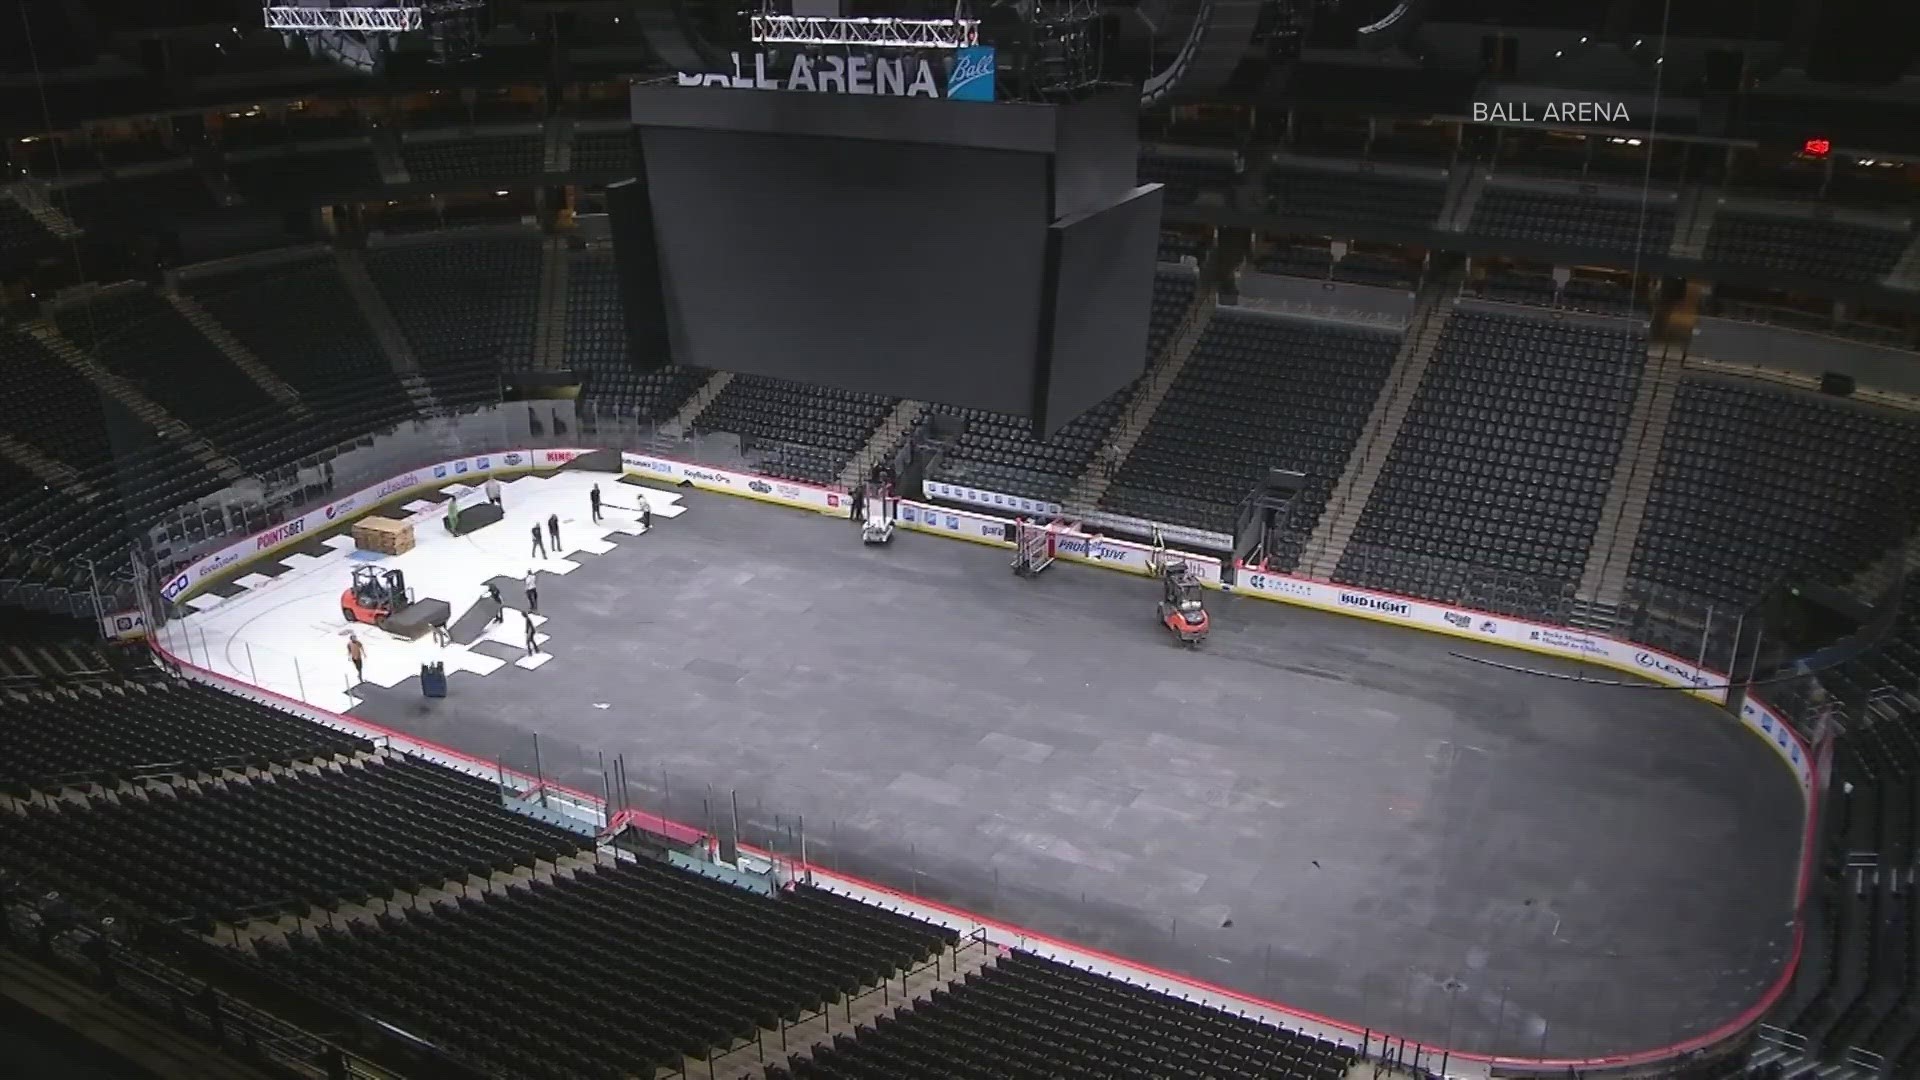 With the Nuggets, Avalanche and Mammoth all in the playoffs, crews at Ball Arena have been busy recently changing up the flooring at the arena.